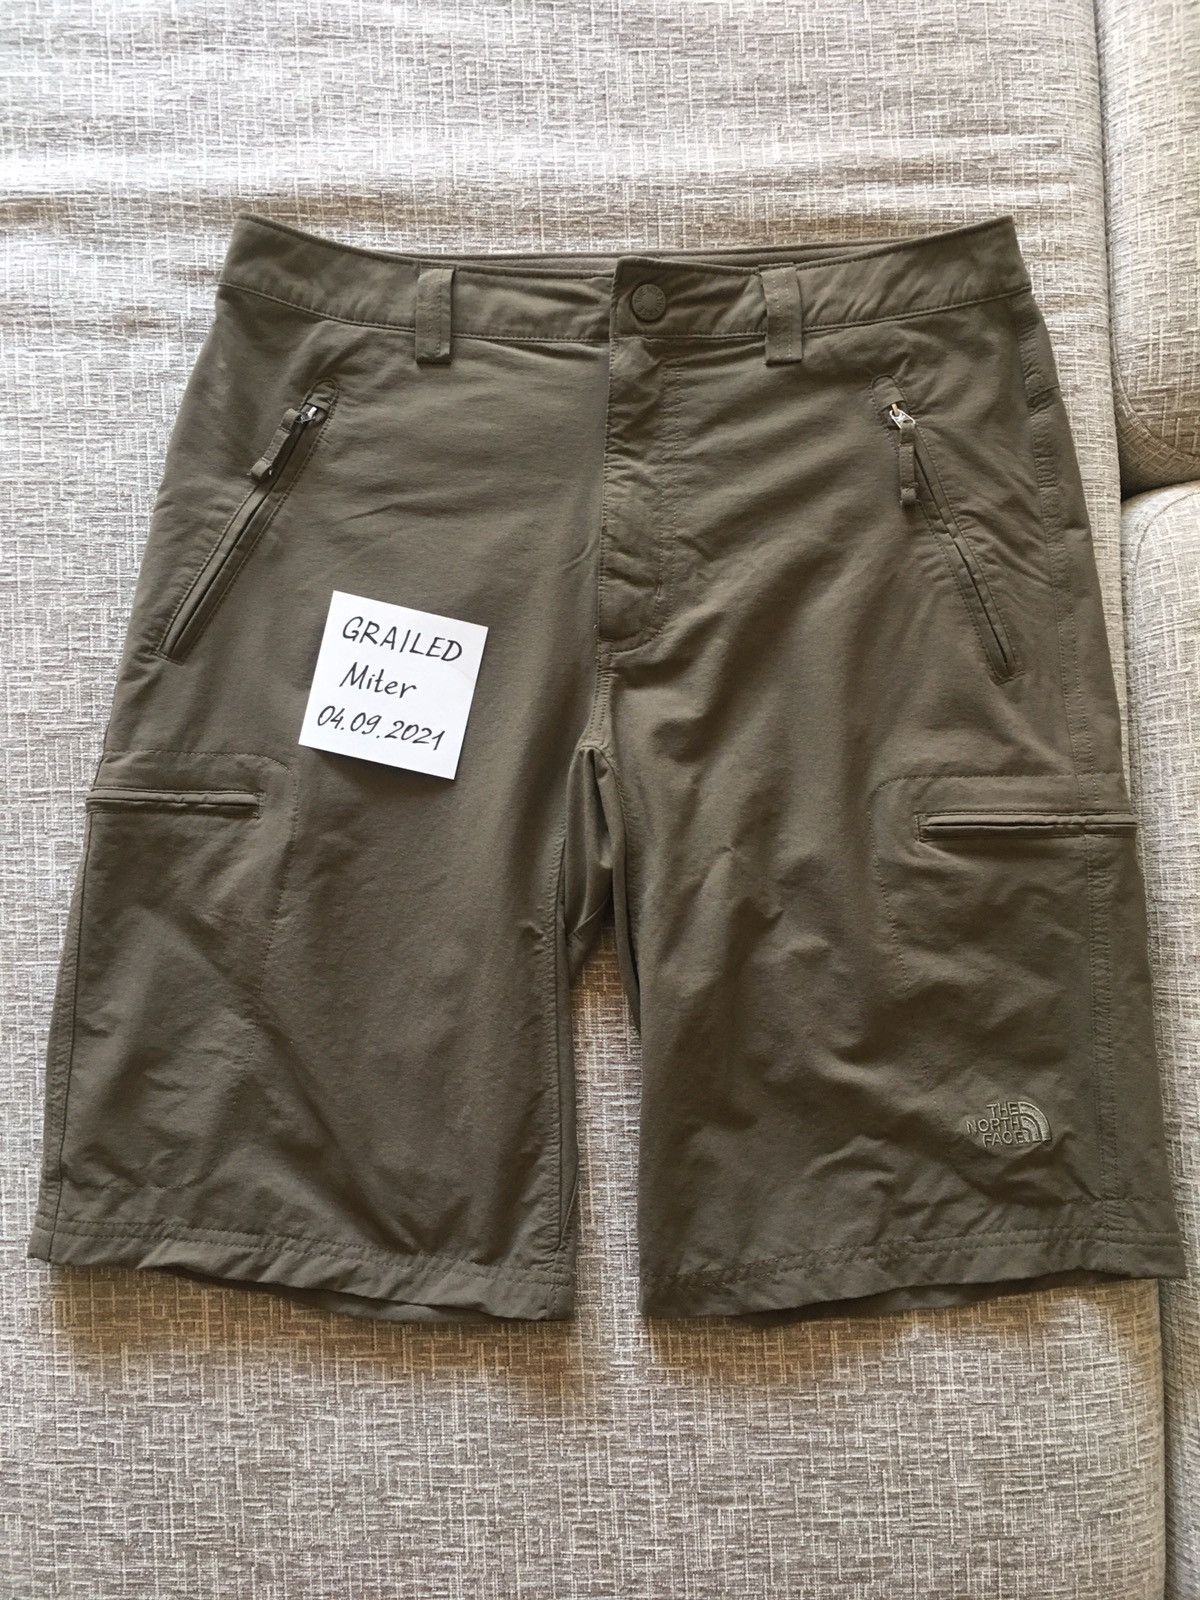 The North Face Exploration Shorts | Grailed